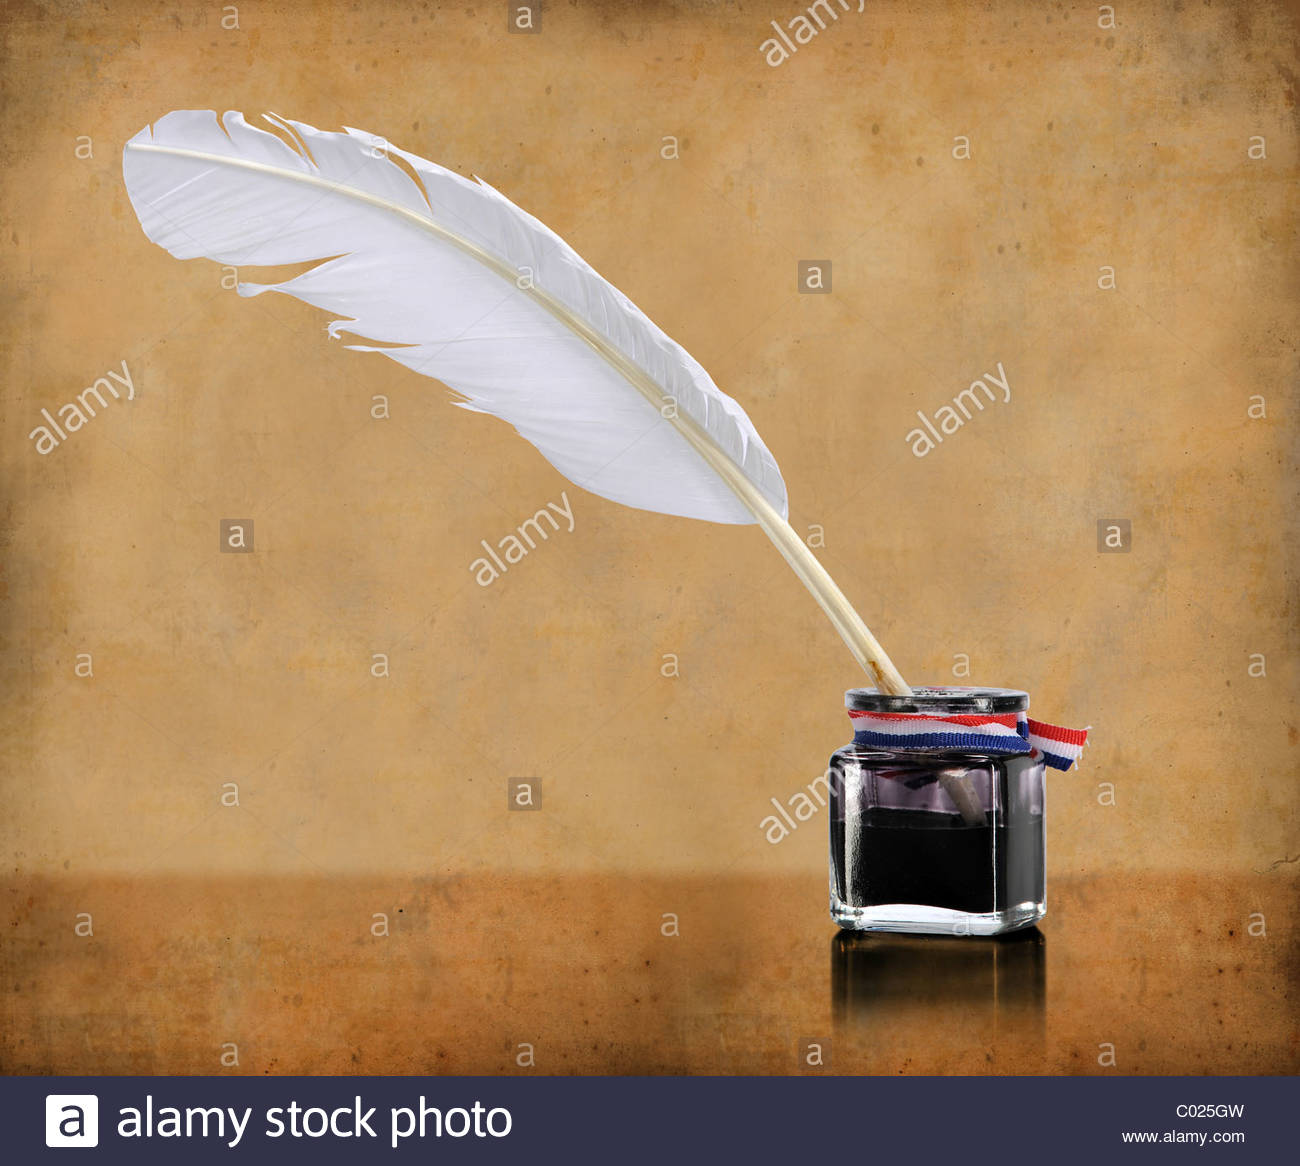 Vintage Writing Quill And Inkwell Over Grunge Background Stock